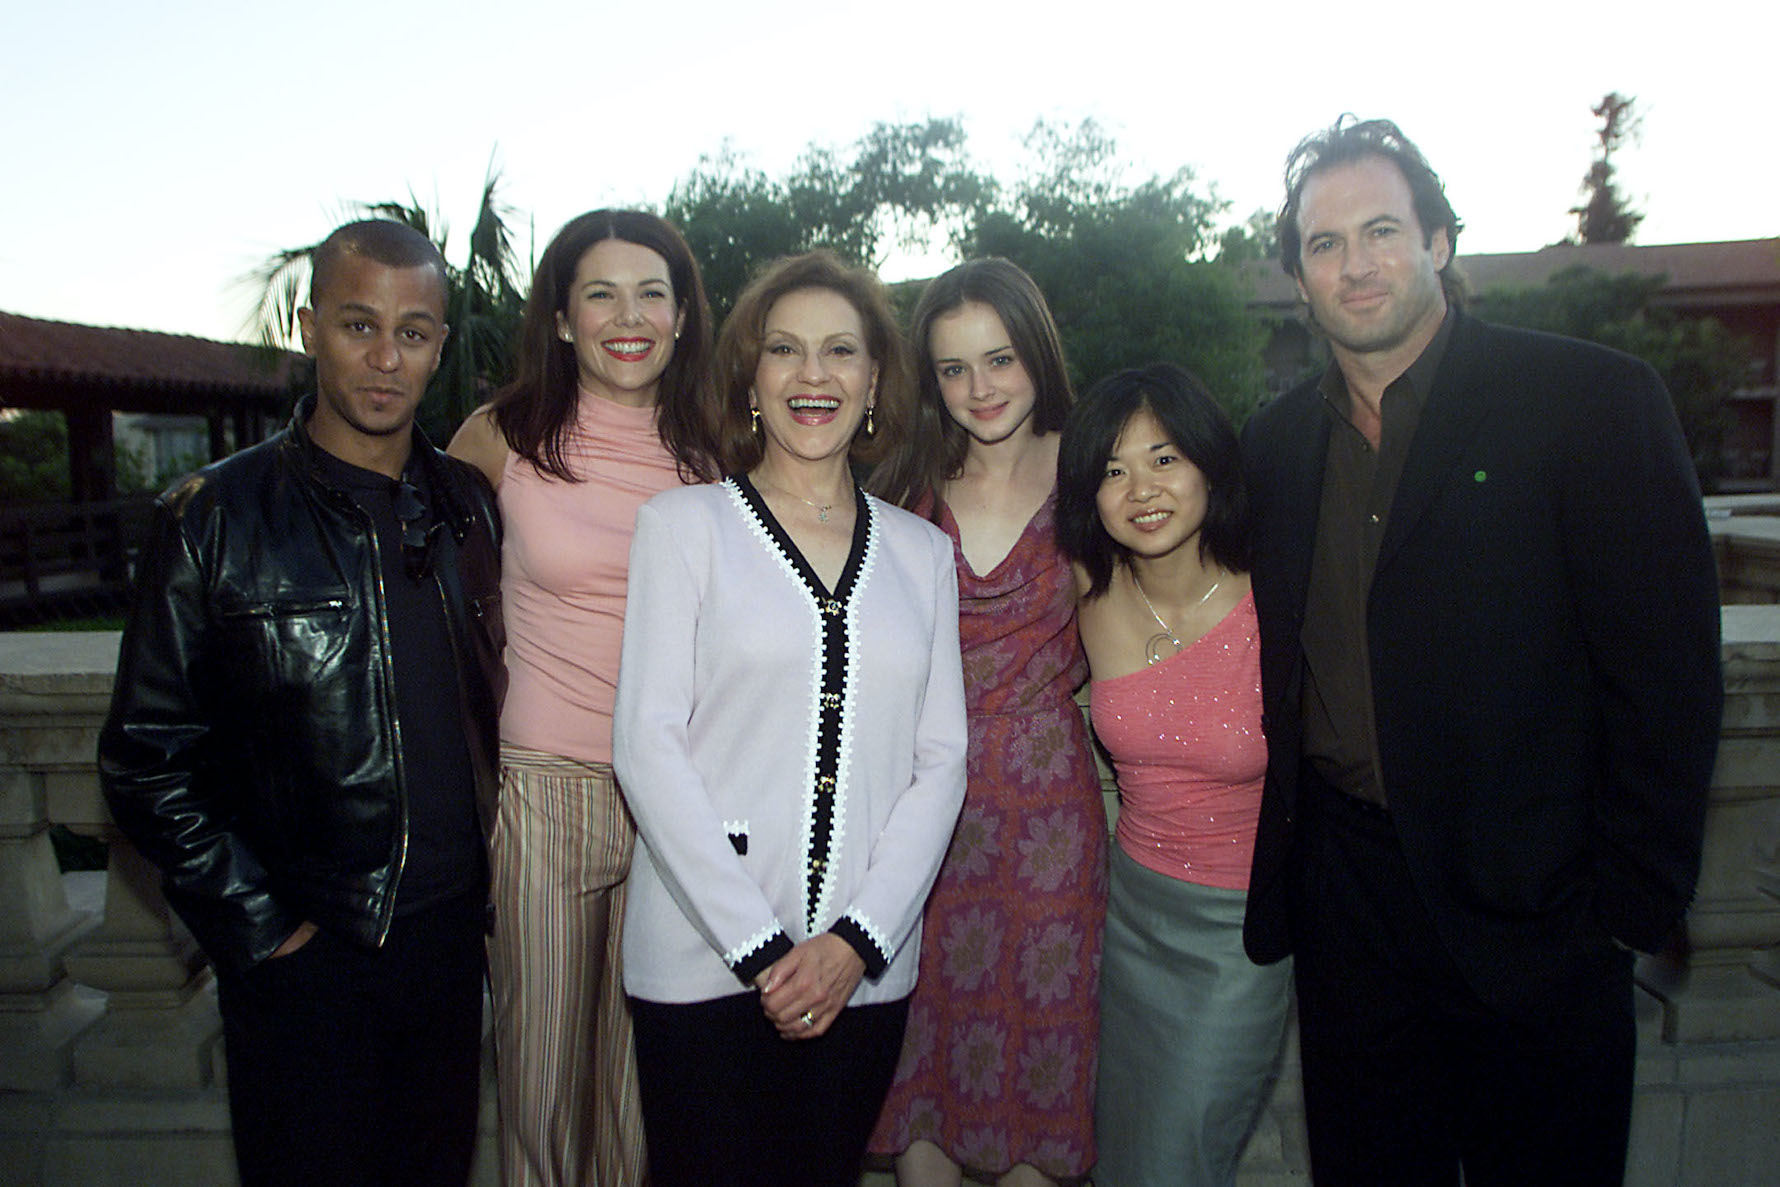 Yanic Truesdale, Lauren Graham, Kelly Bishop, Alexis Bledel, Keiko Agena and Scott Patterson at the TCA Awards in 2001